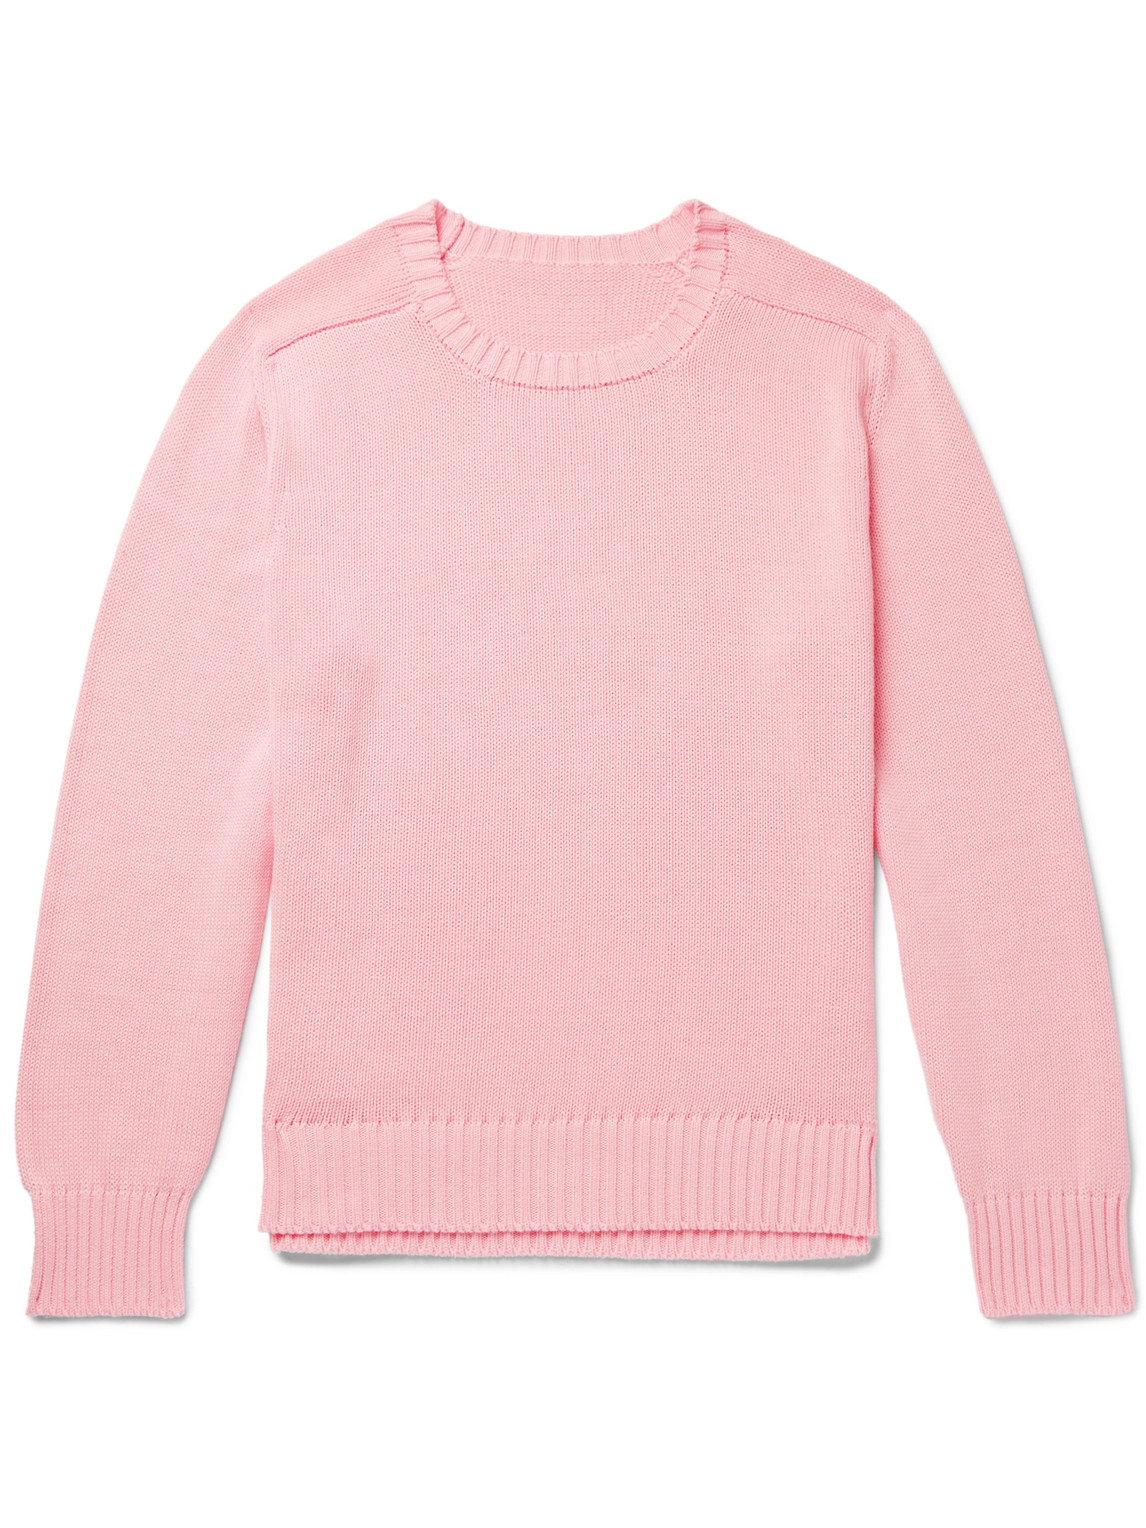 Anderson & Sheppard Cotton Sweater In Pink